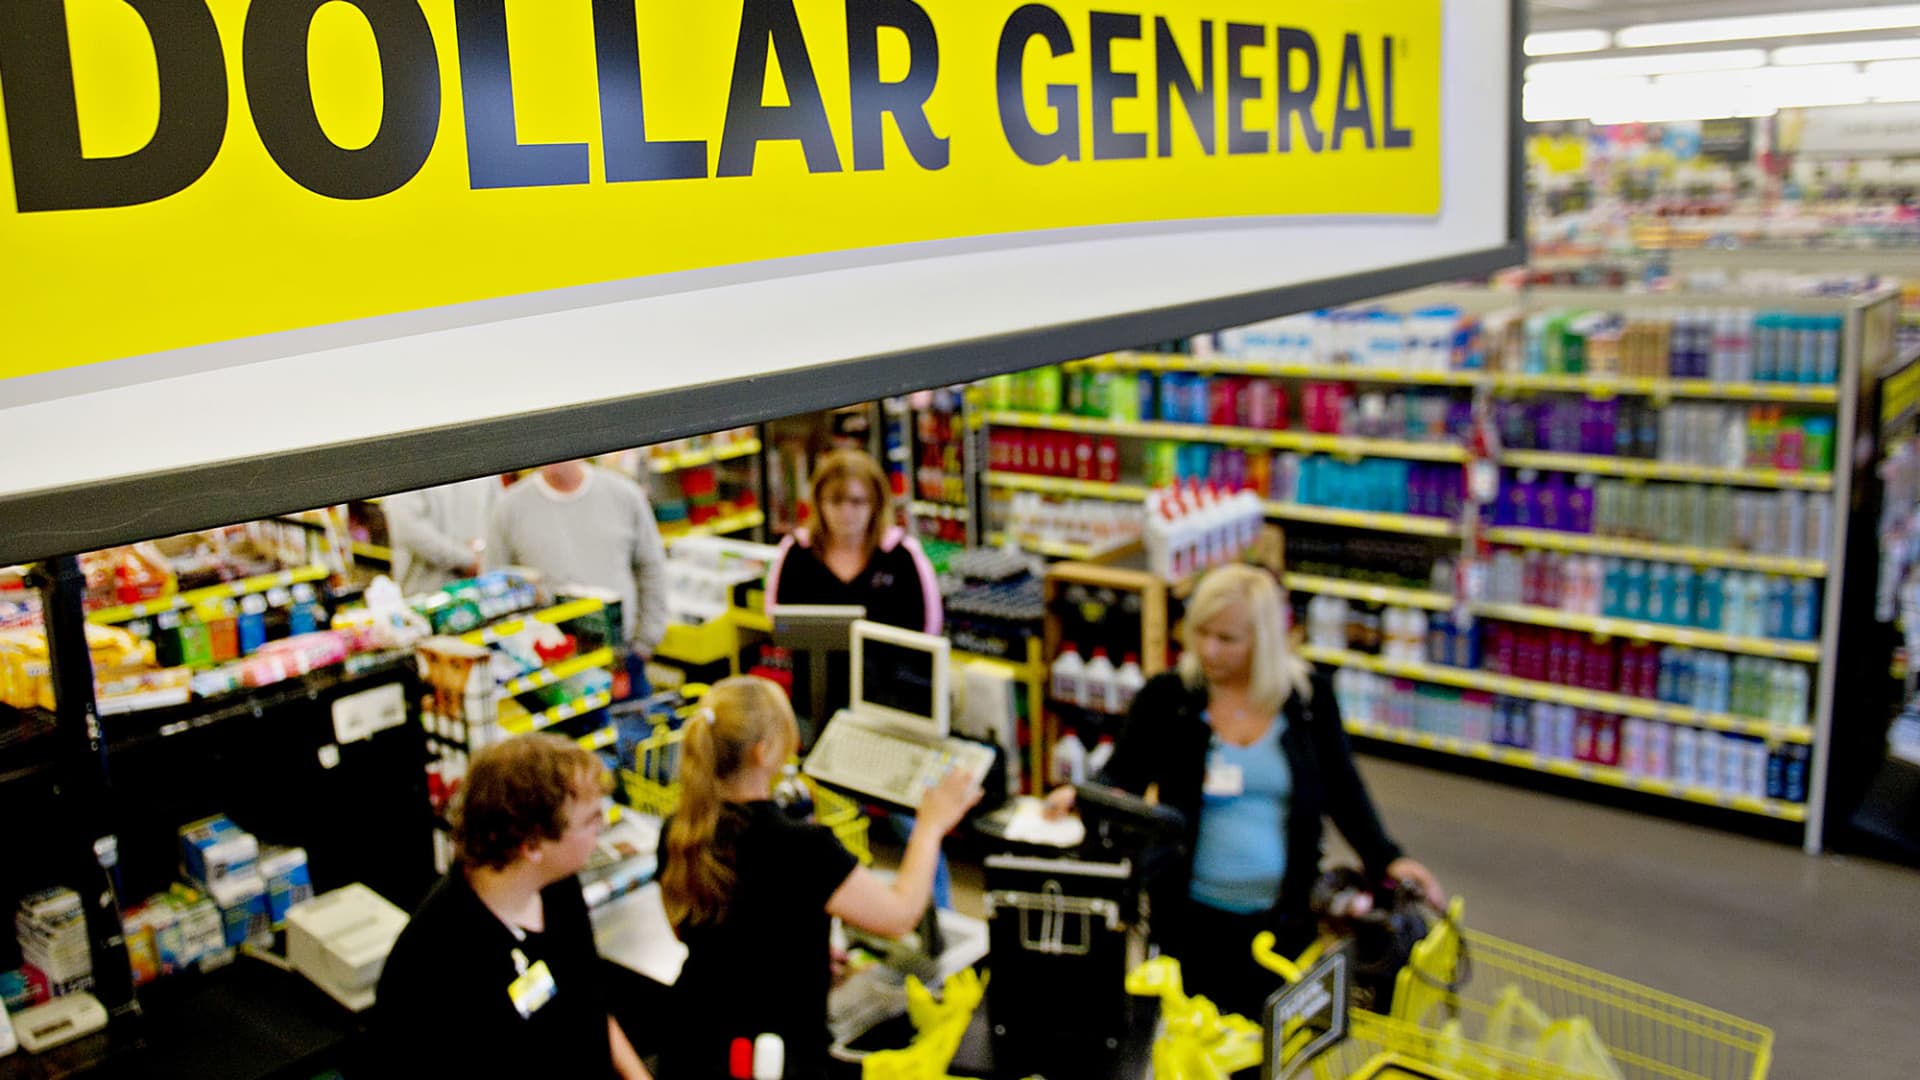 A Dollar General store in Creve Coeur, Illinois.